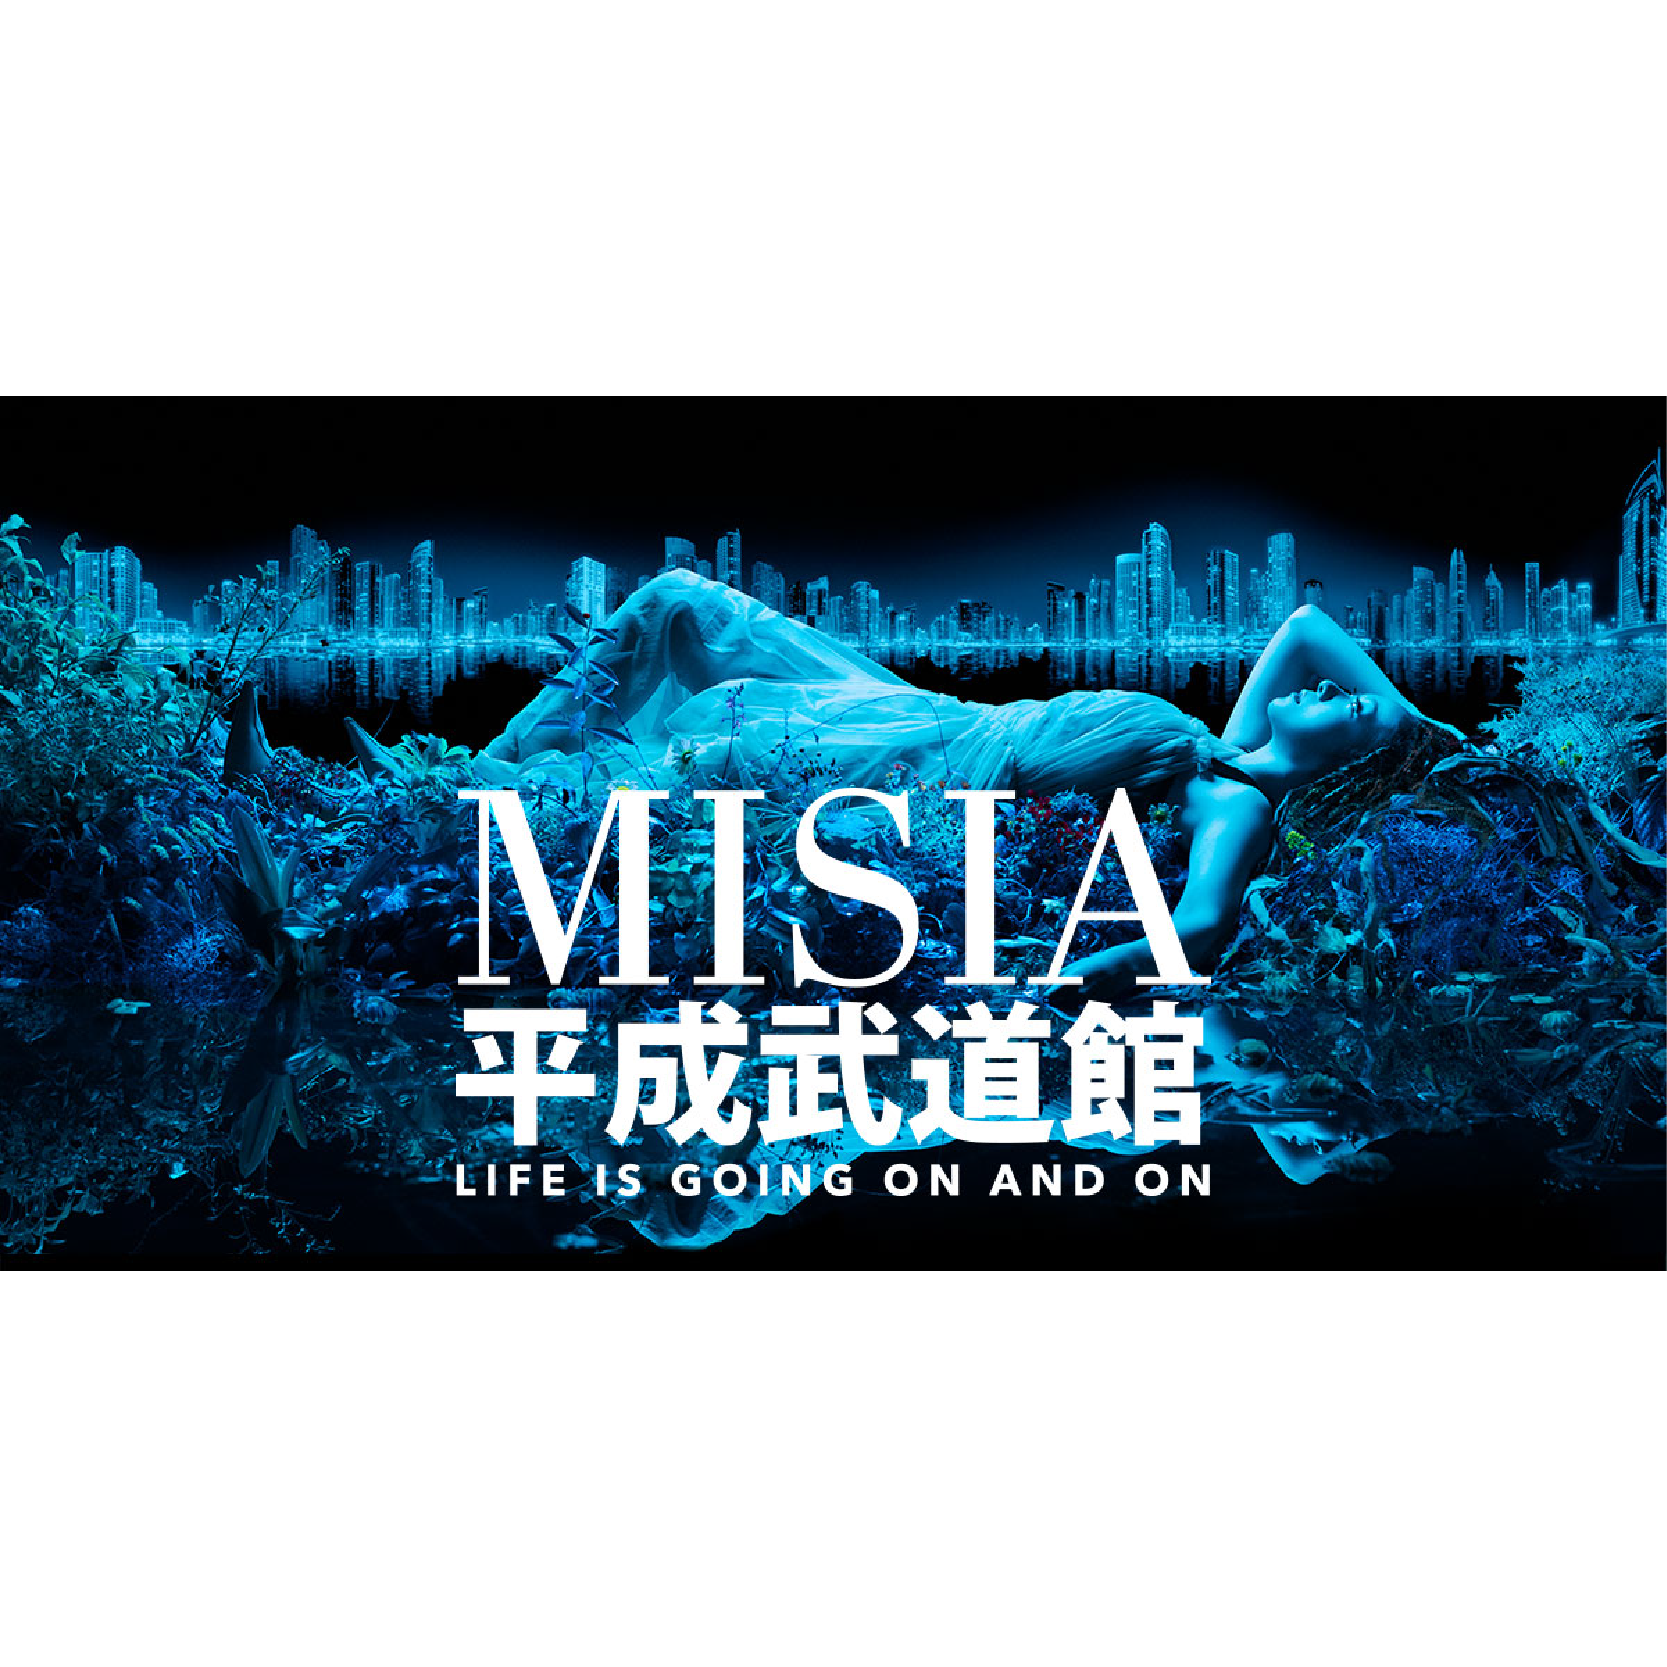 MISIA 平成武道館 LIFE IS GOING ON AND ON [DVD]